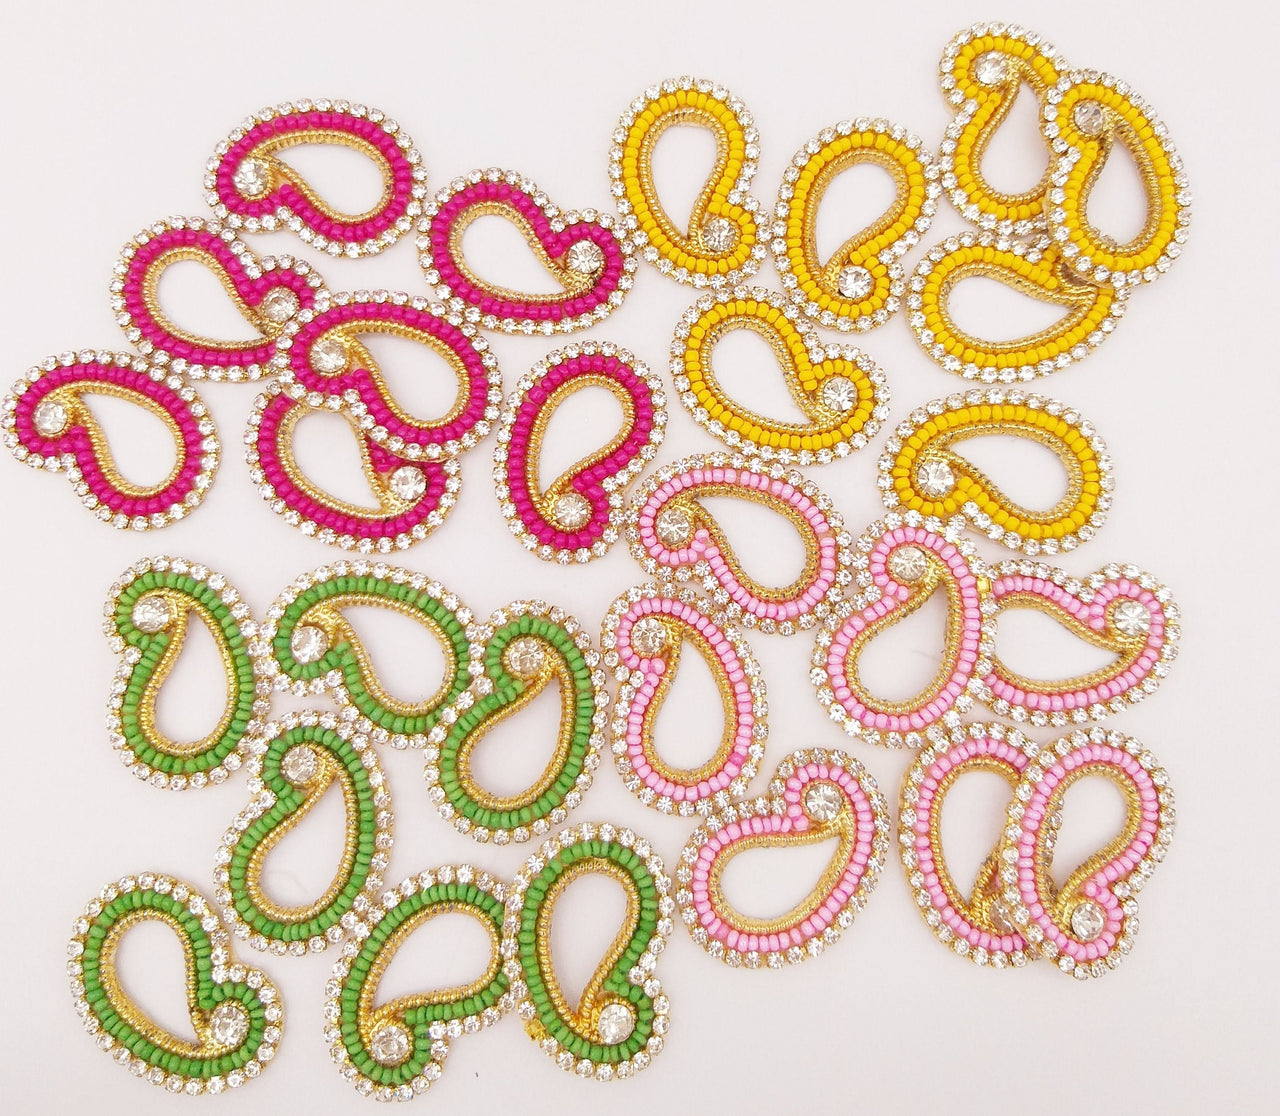 5 Paisley Appliques In Magenta Pink Beads and Rhinestones, Gold Paisley Appliques, Beaded Applique